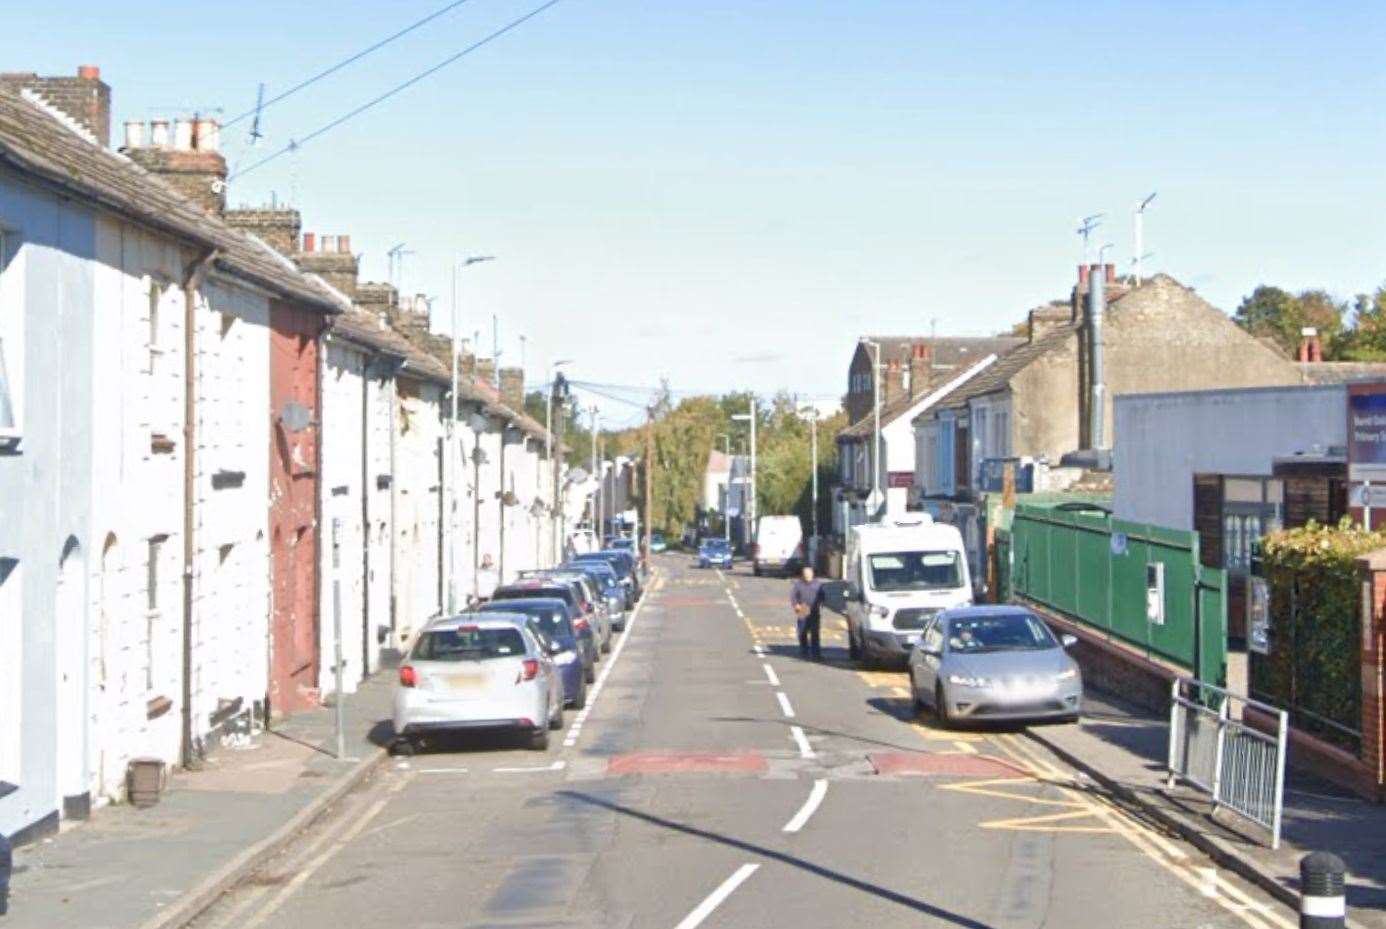 Police were called to Richmond Road in Gillingham. Picture: Google